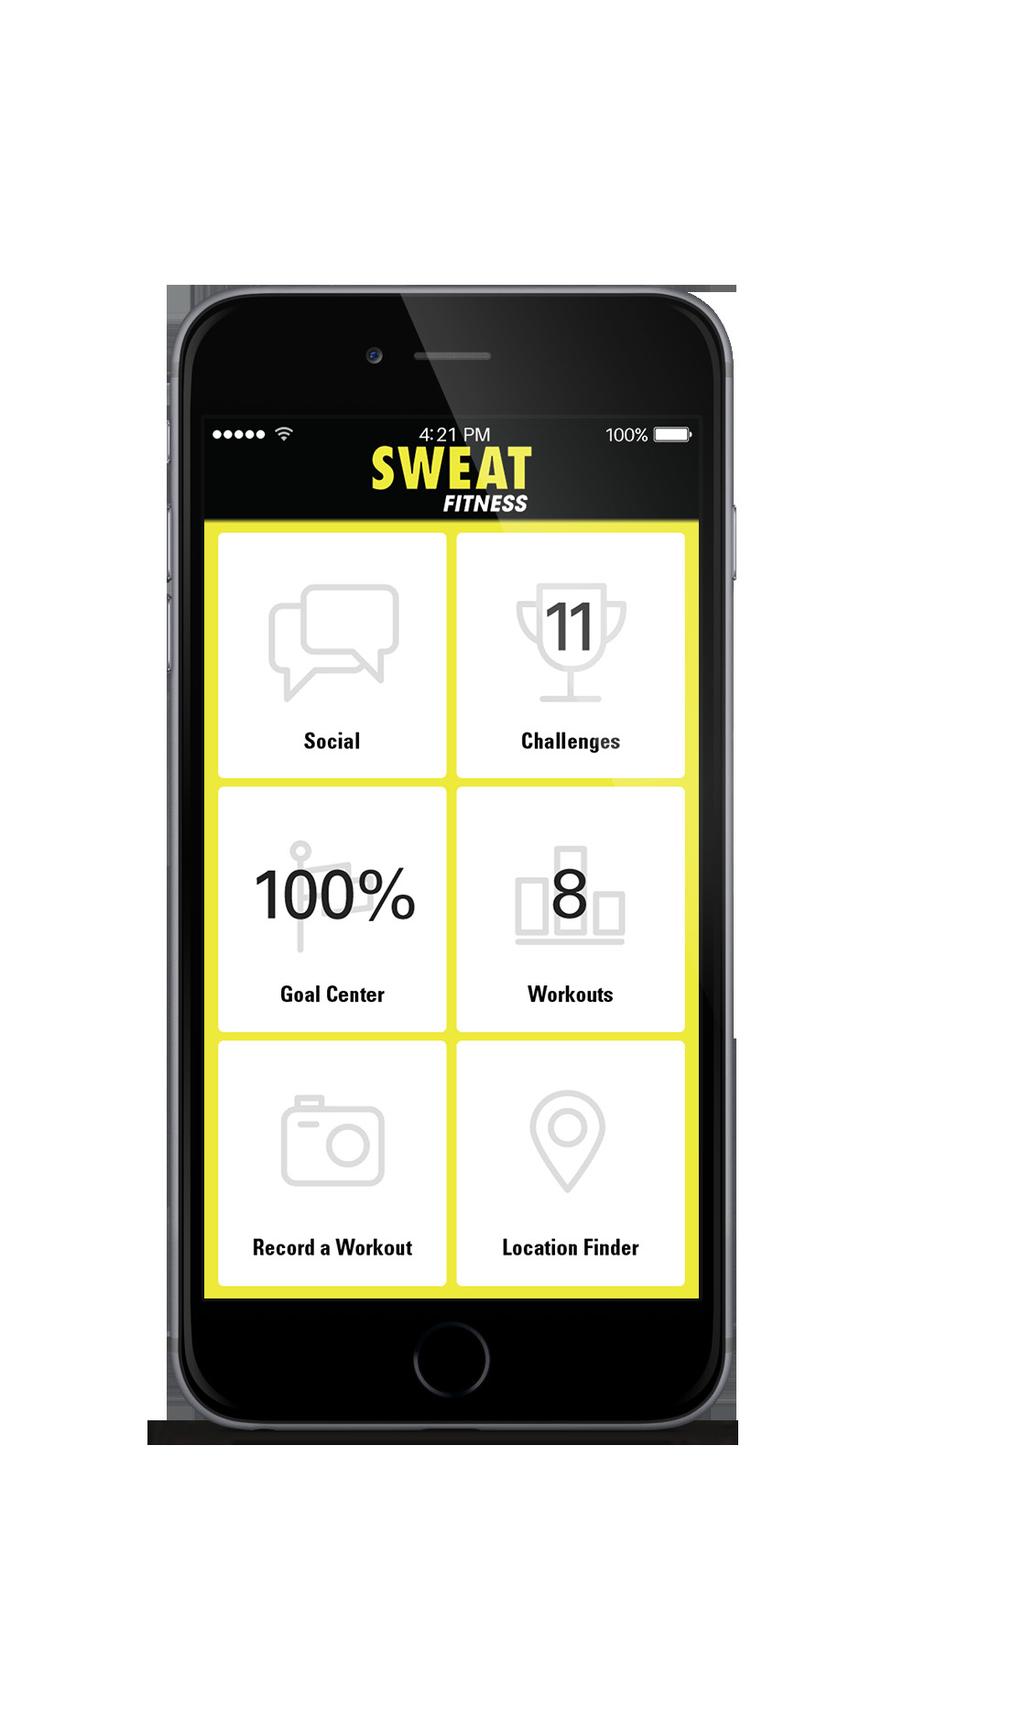 Download Today! SWEAT FITNESS APP THINGS JUST GOT EASIER. We want to make logging your workouts, rooting on friends, and booking your classes even easier. With our app you can do all of that!